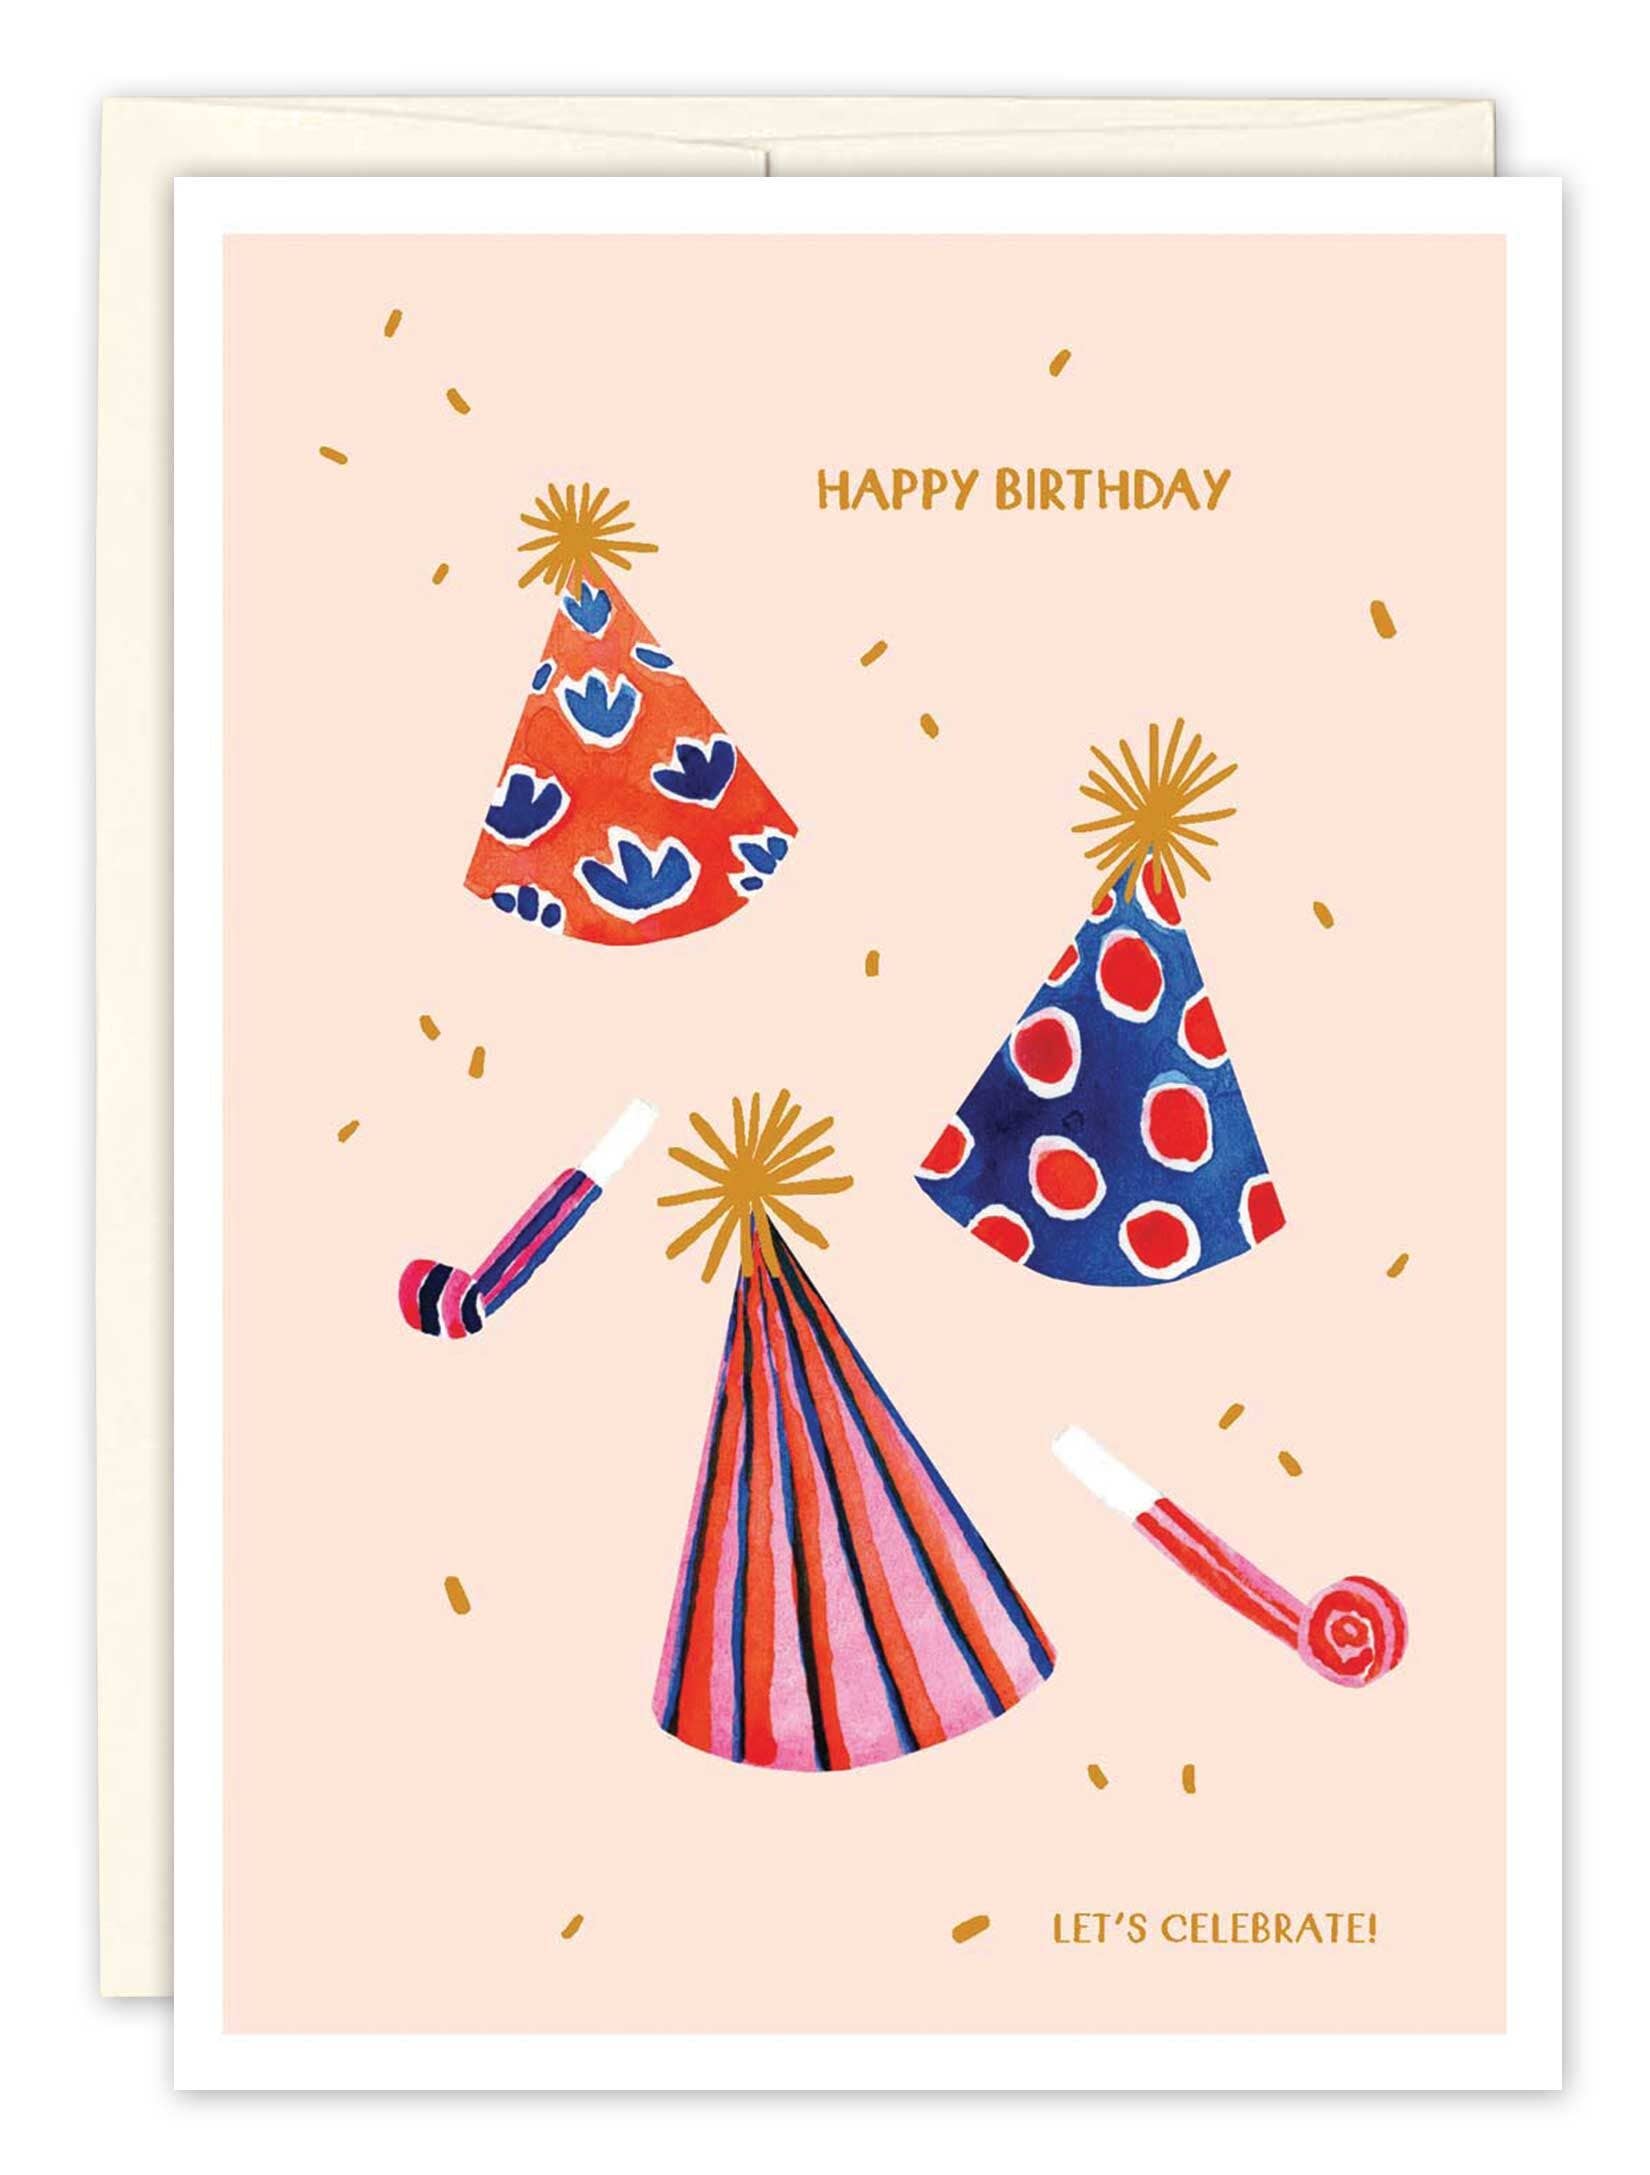 Biely & Shoaf - Party Hats Birthday Card